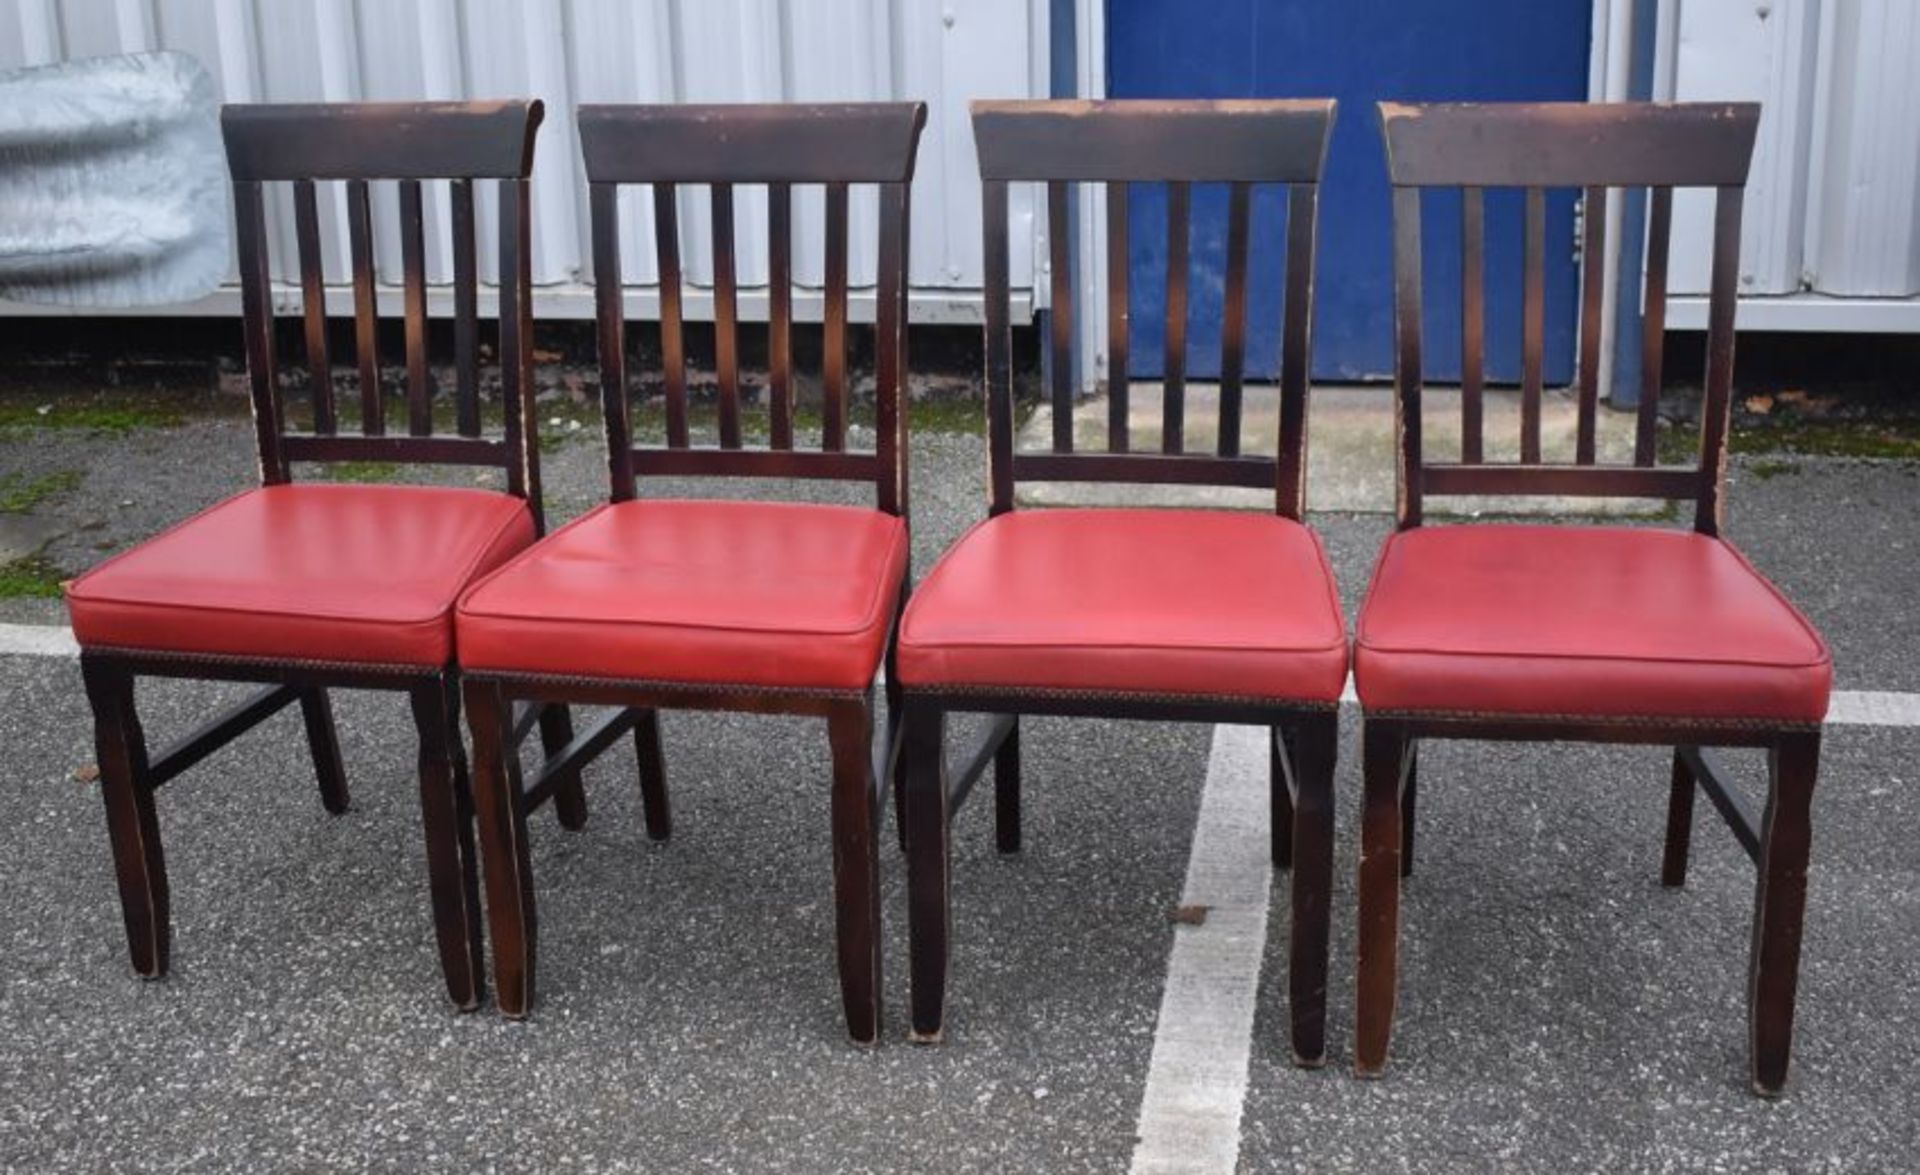 8 x Restaurant Dining Chairs With Dark Stained Wood Finish and Red Leather Seat Pads - Recently Remo - Image 6 of 6